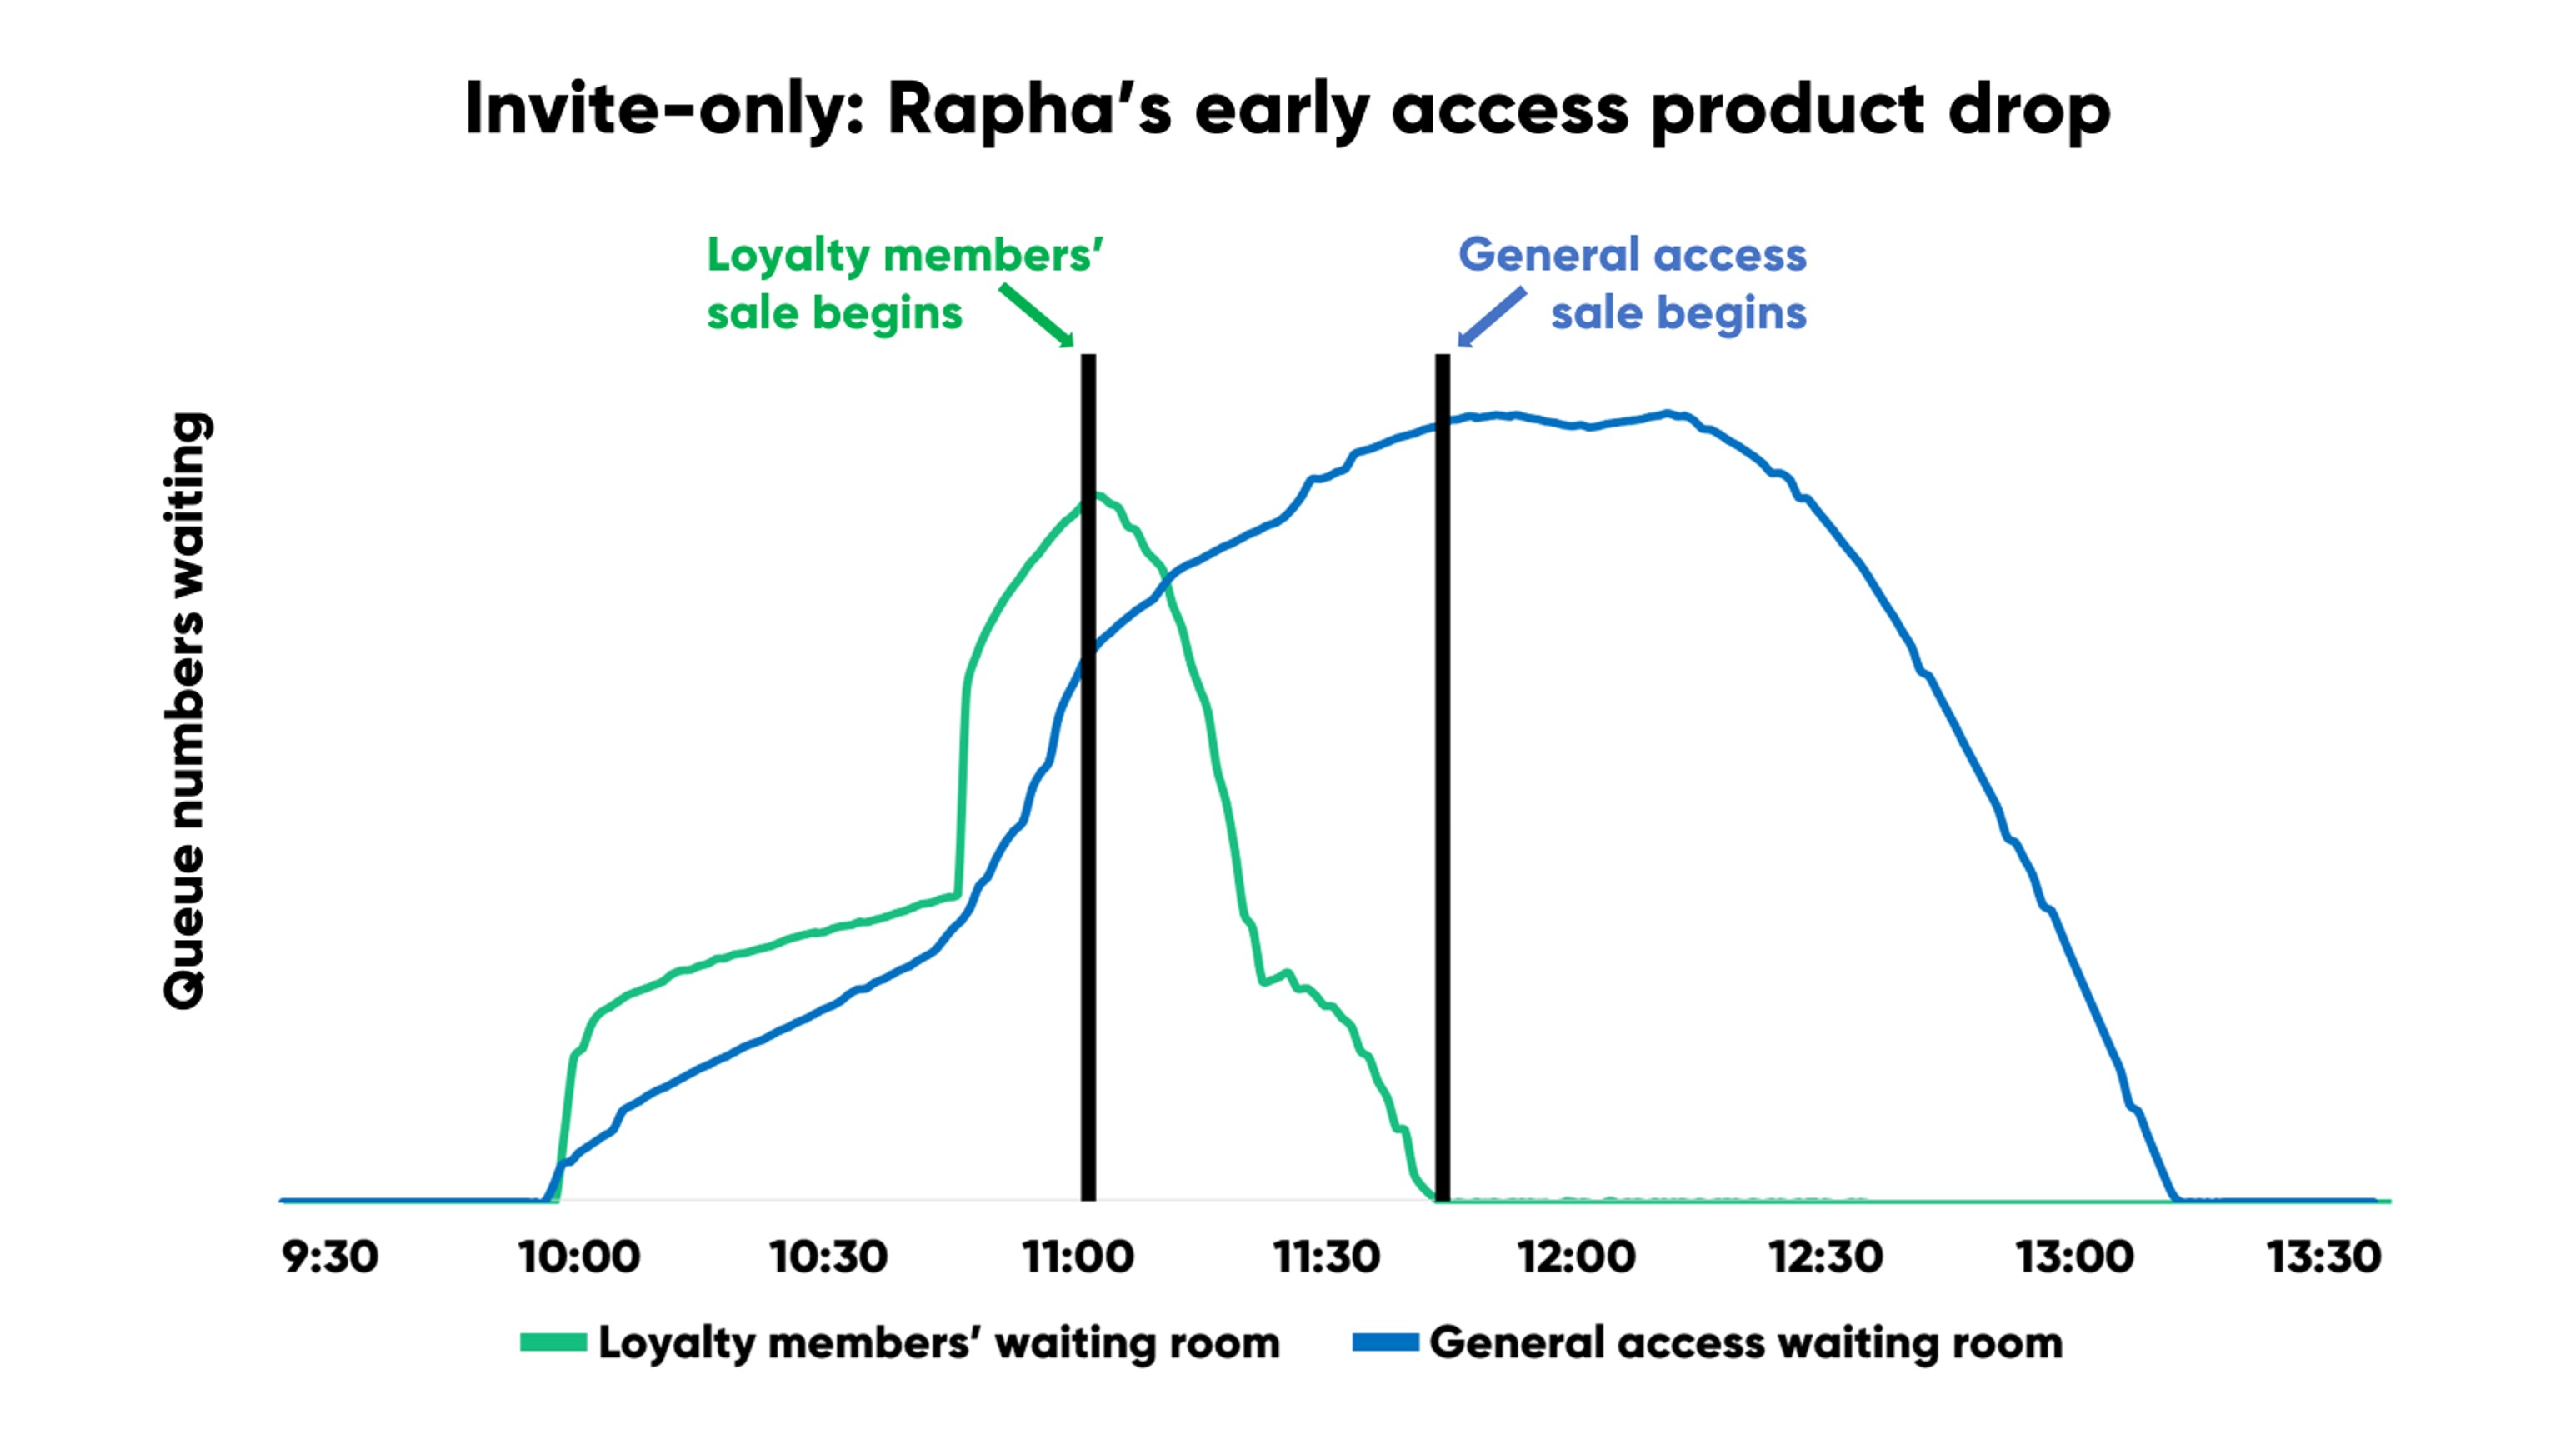 Chart showing member and general access traffic to Rapha's product drop